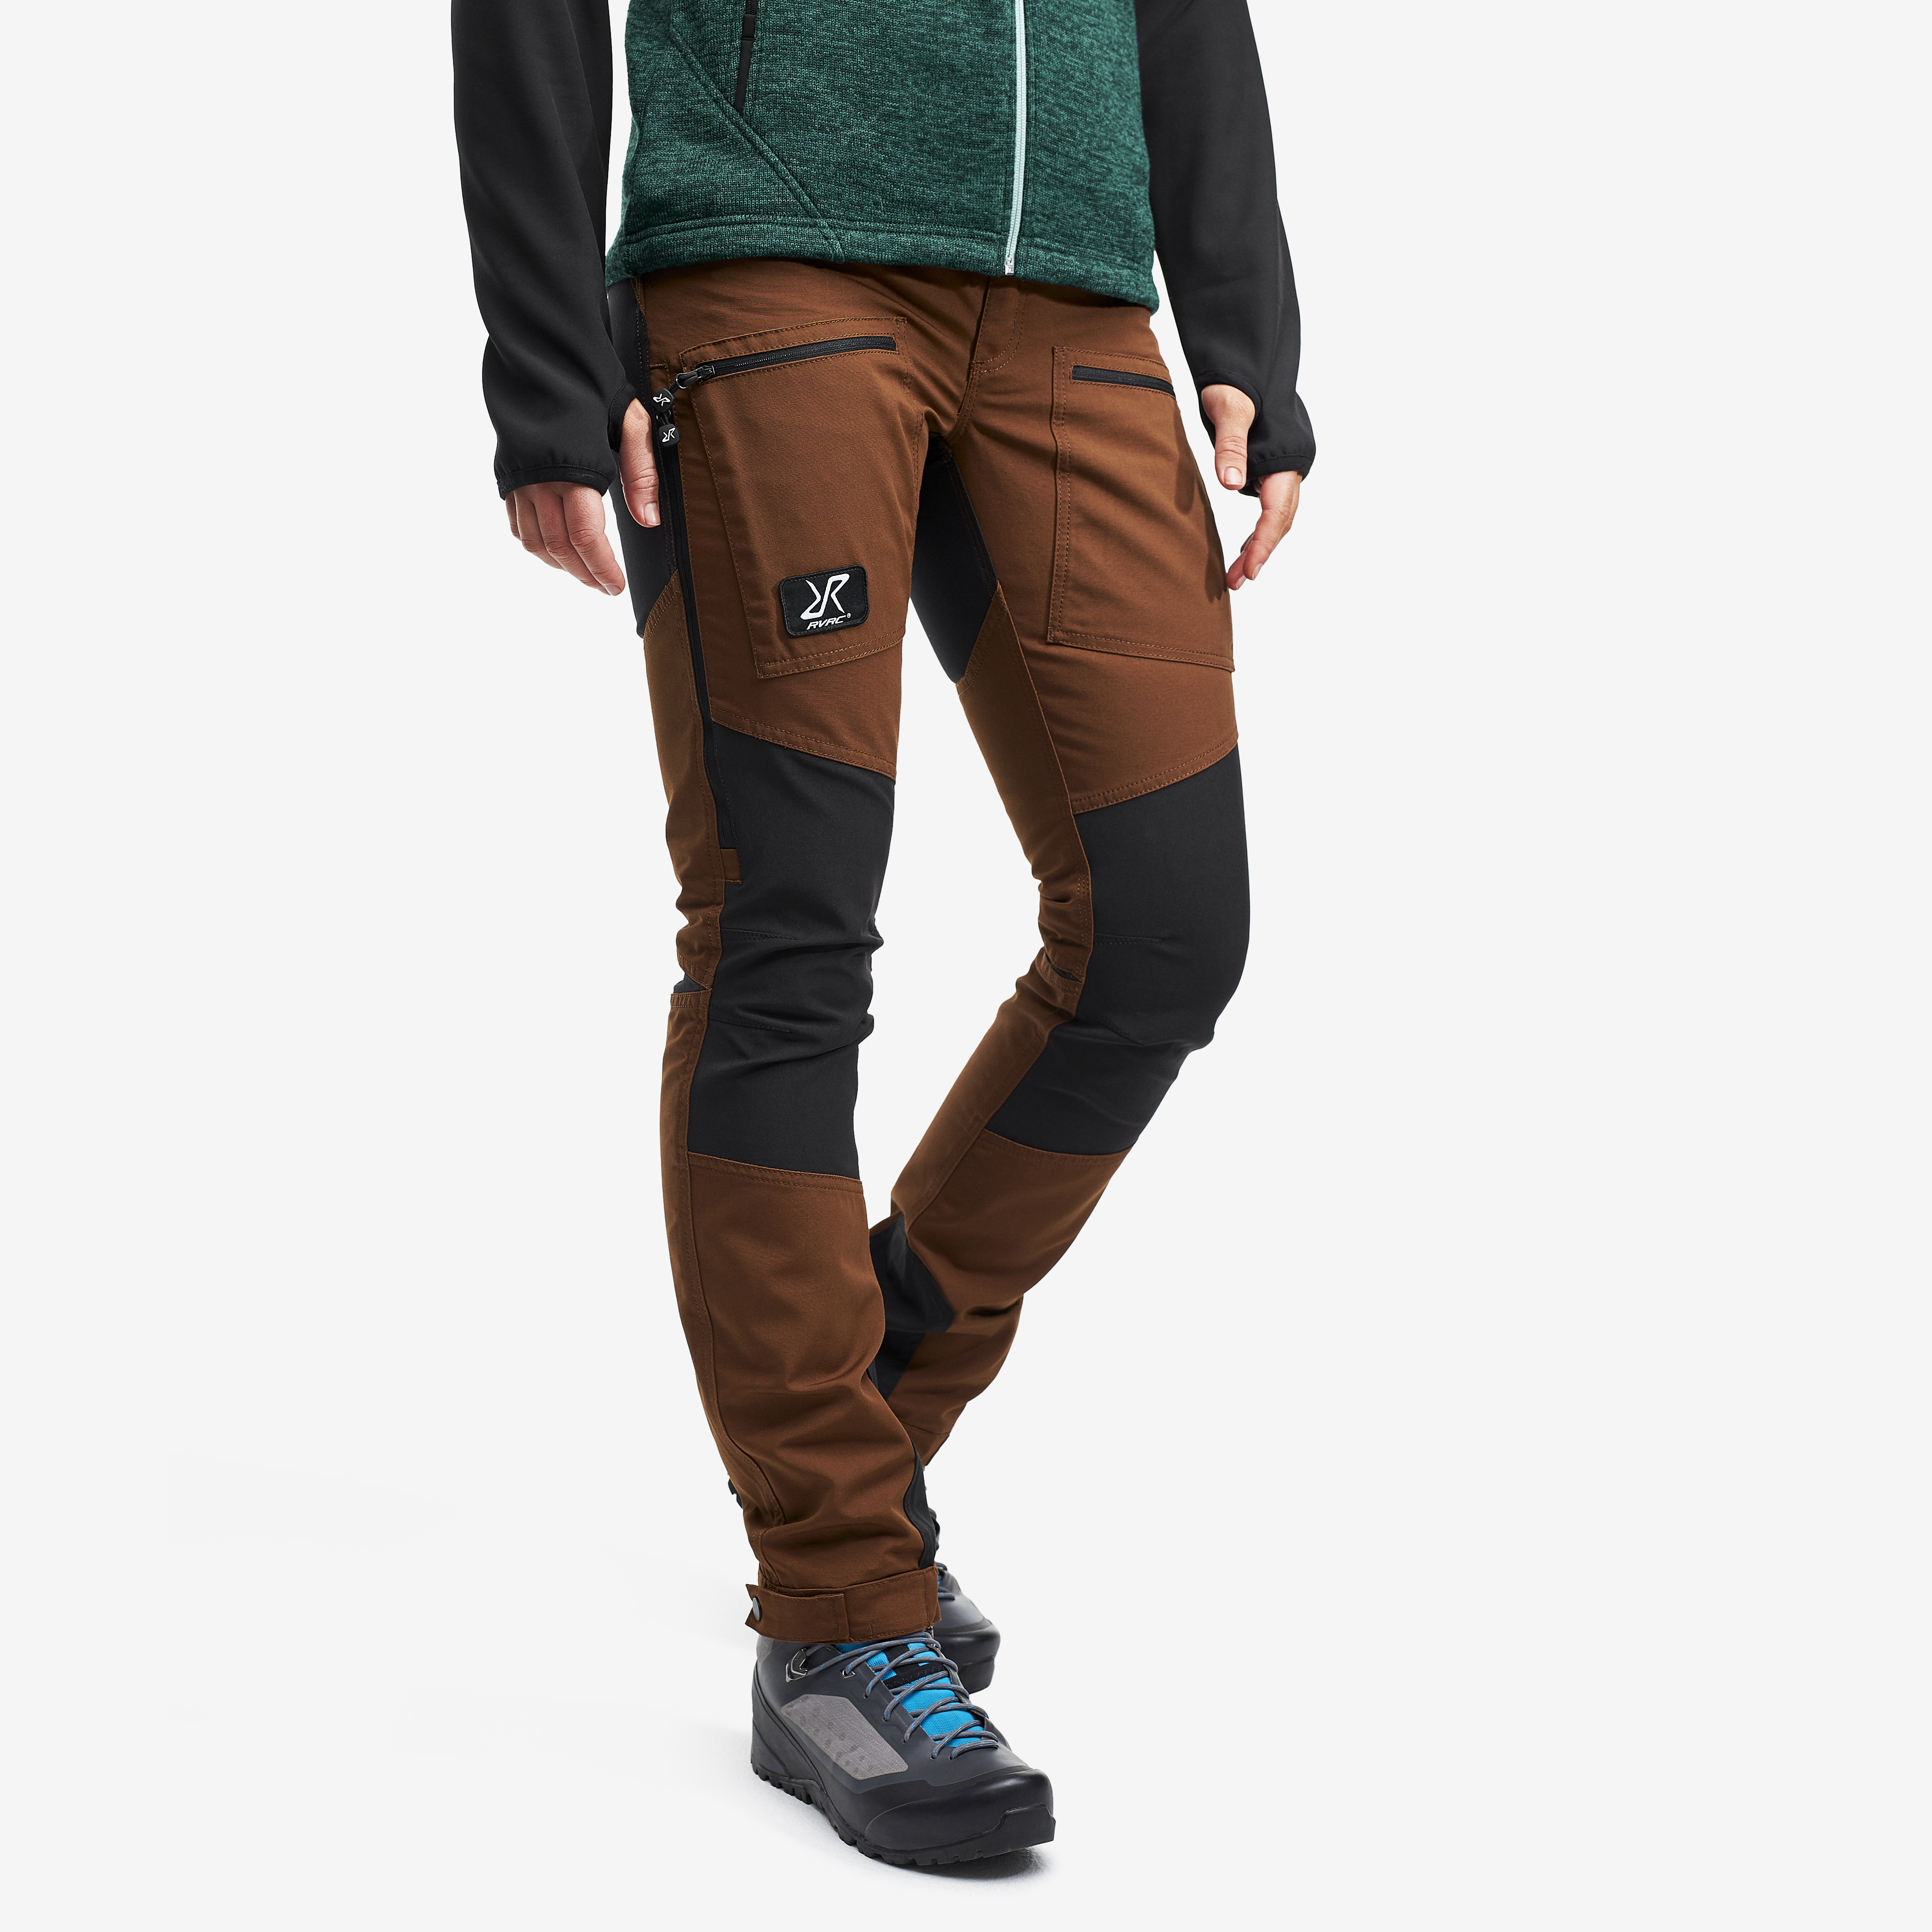 Nordwand Pro hiking pants for women in brown